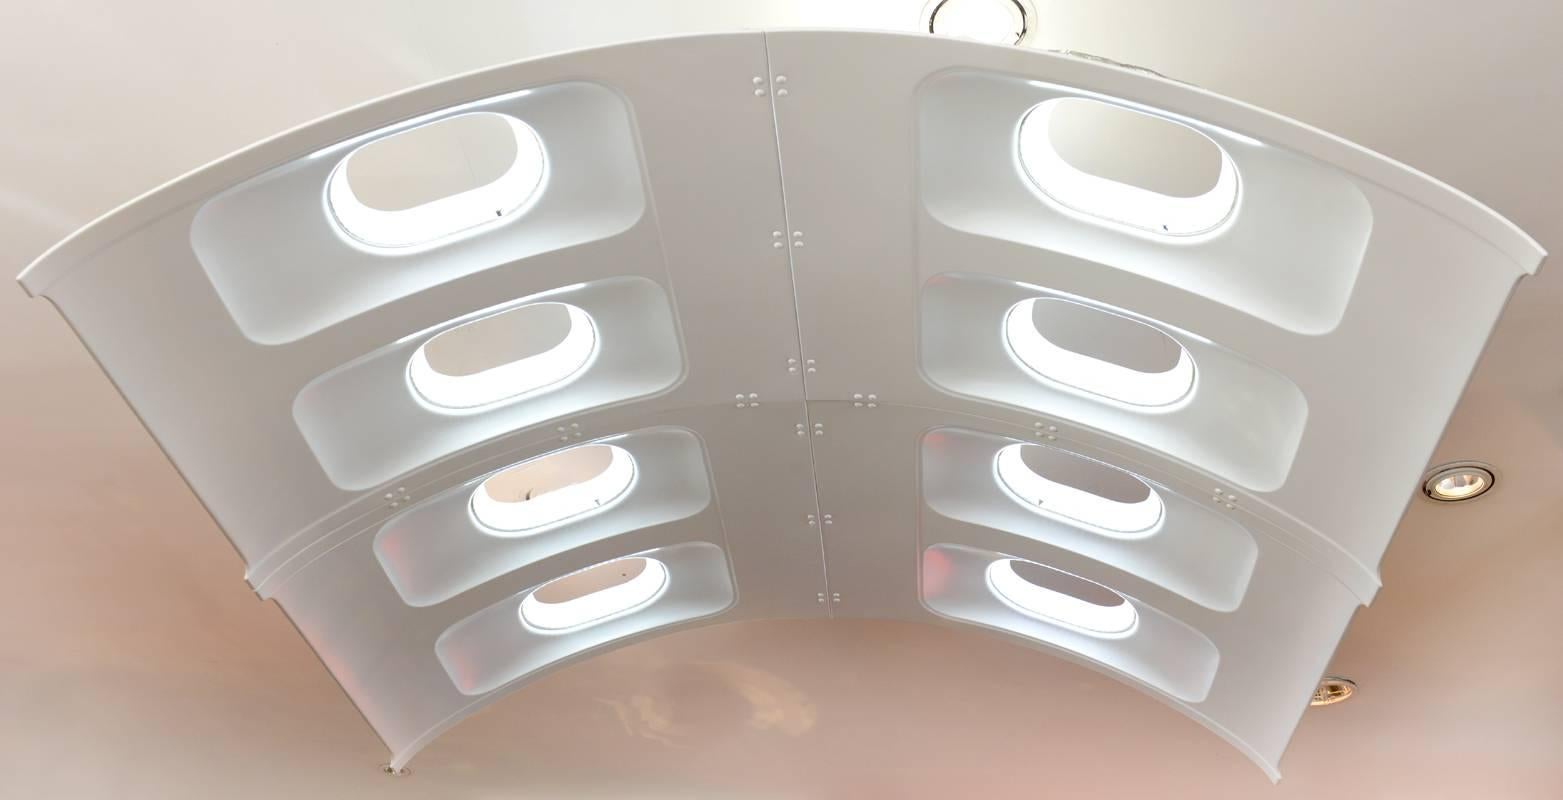 Aircraft fuselage portholes with LED lighting.
Four elements, actual size exceptional piece.
